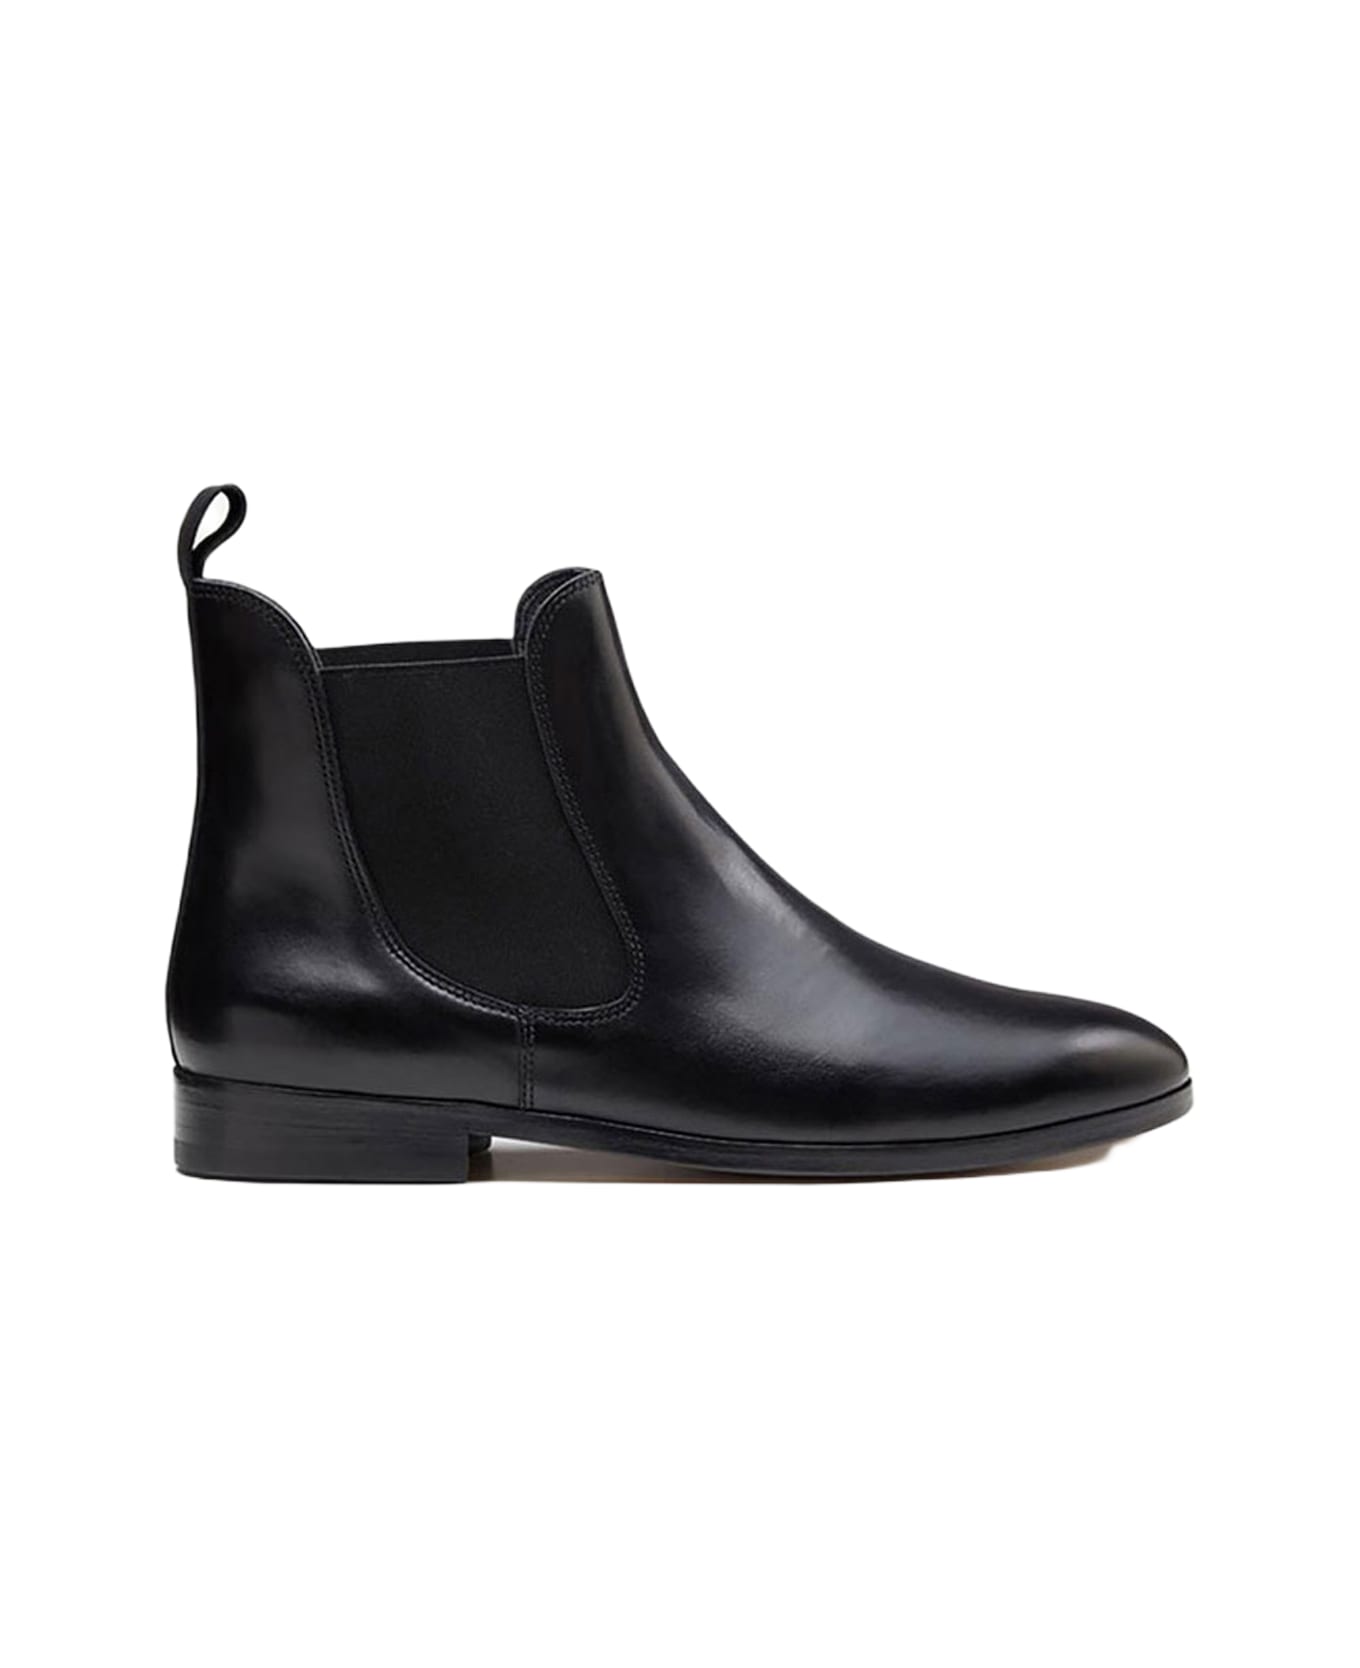 CB Made in Italy Leather Boots Sessanta - Black ブーツ